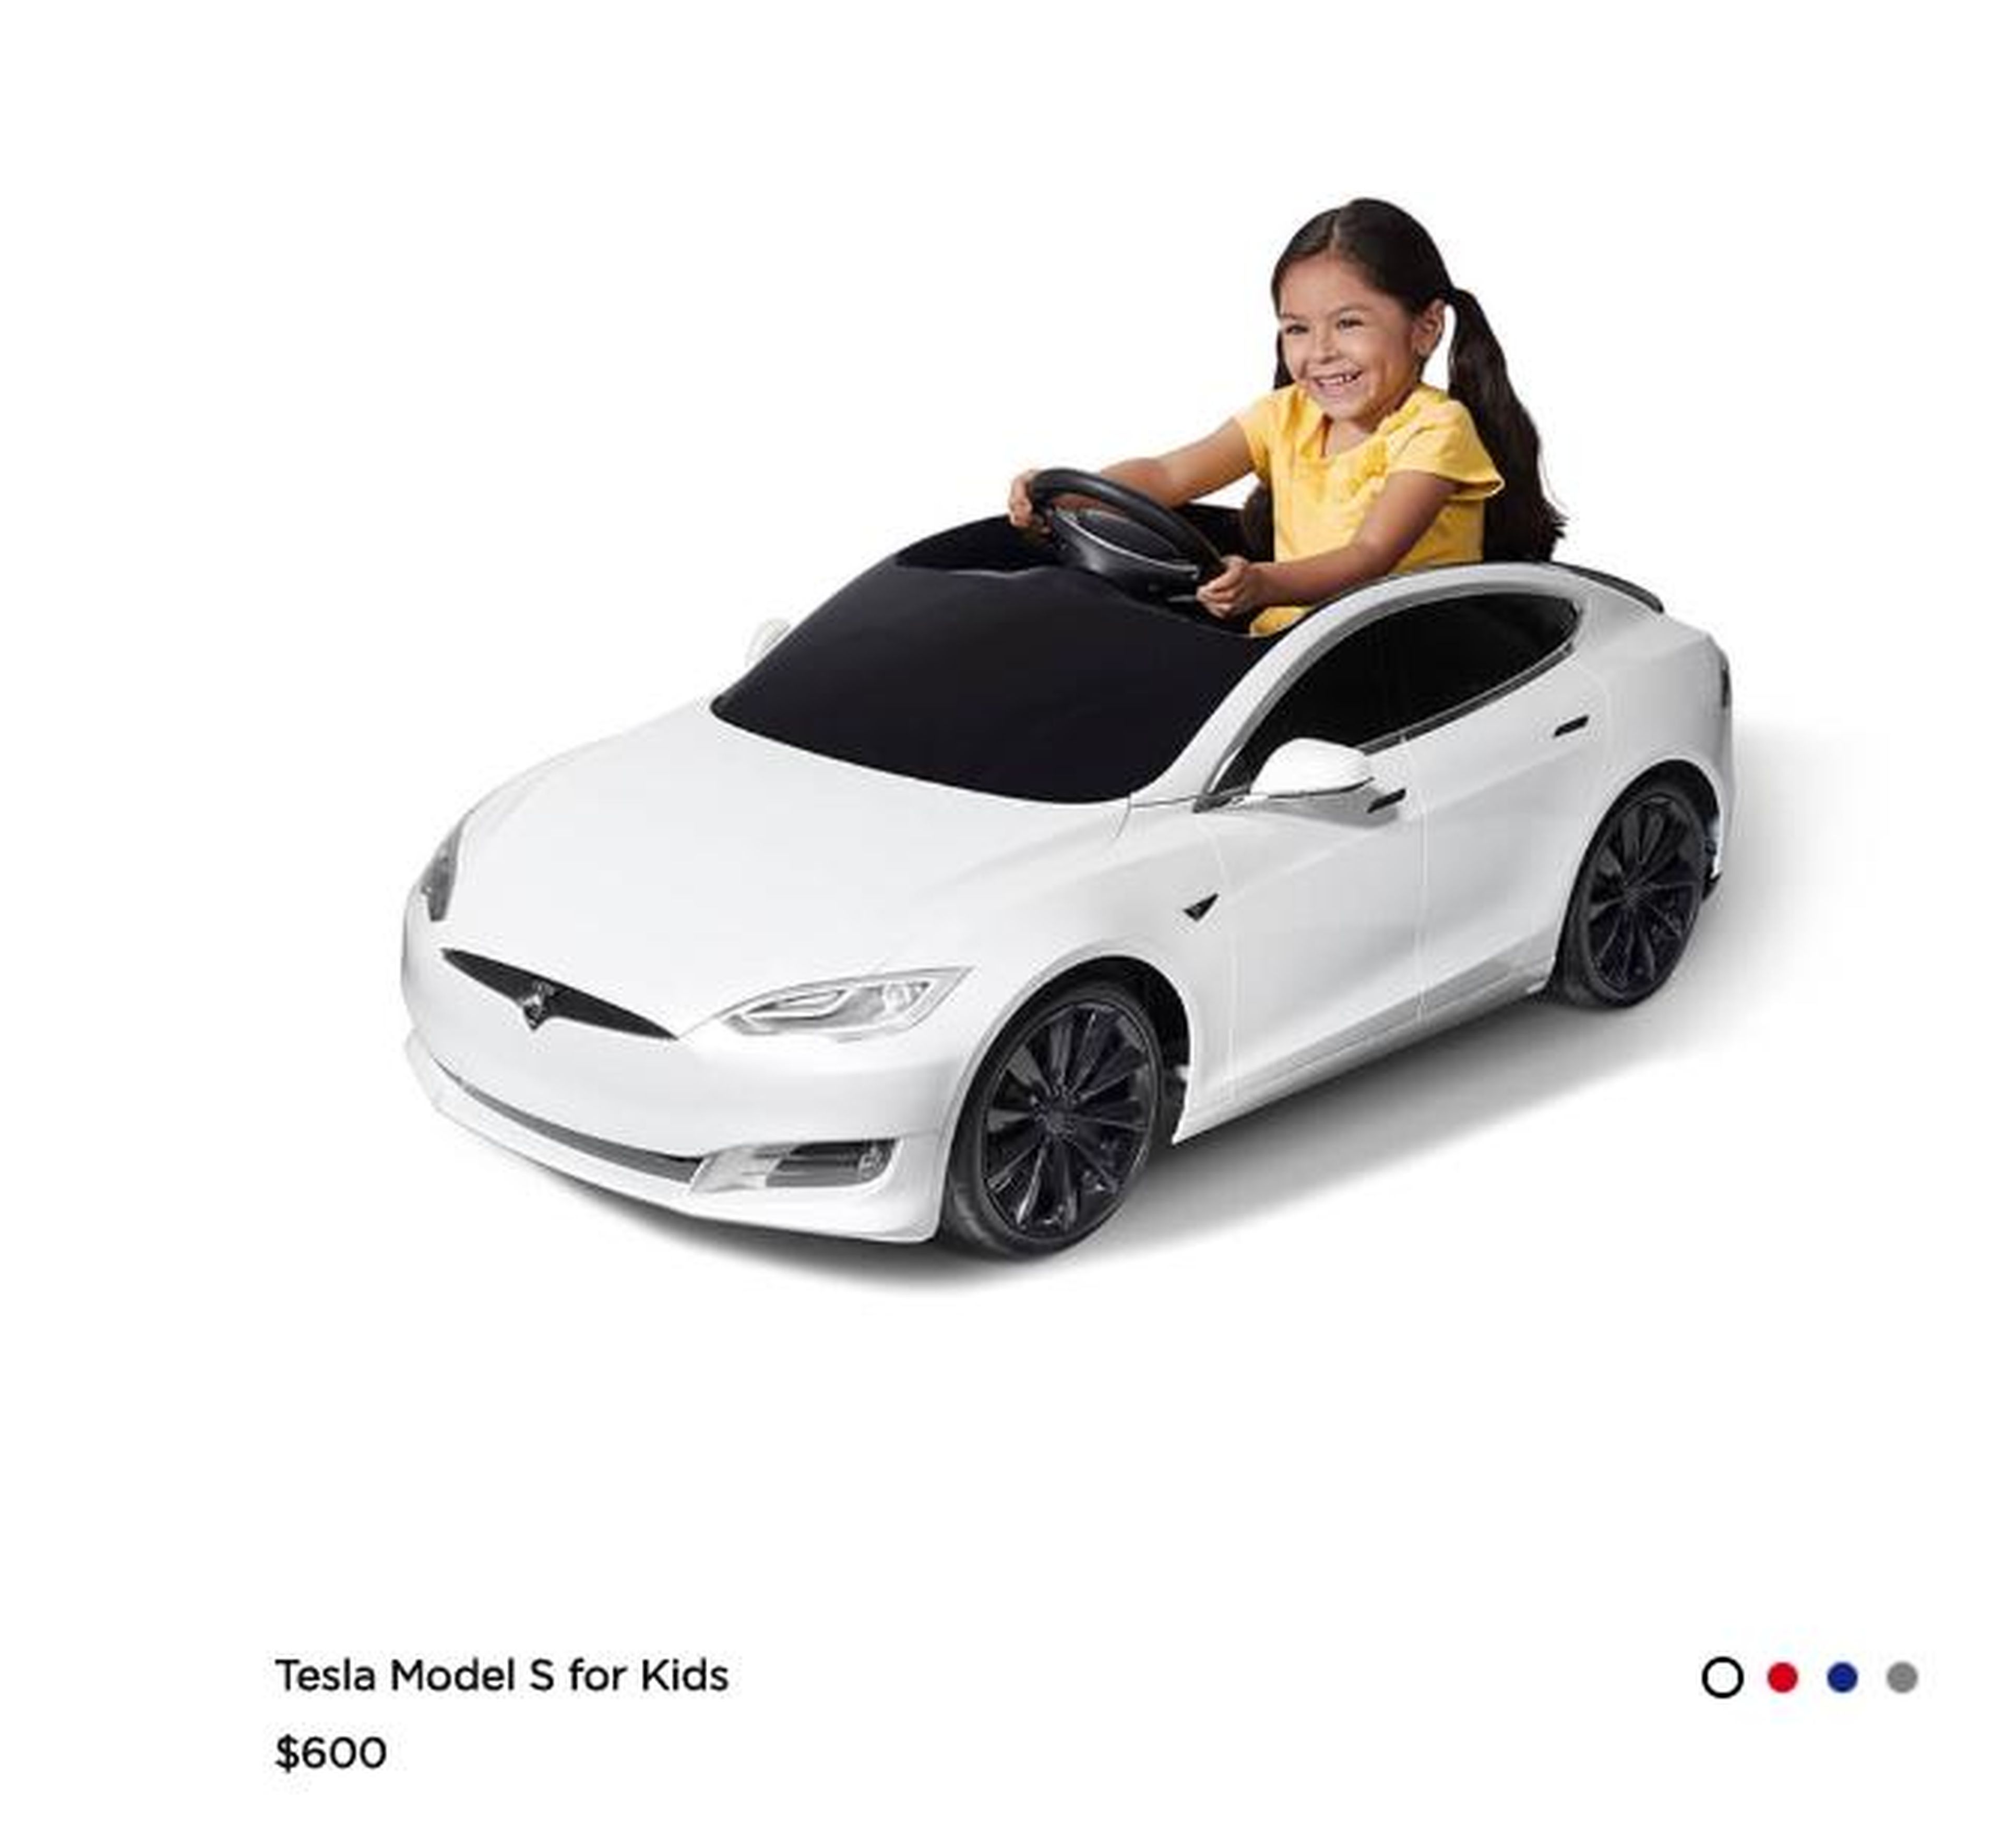 Your kids can have a Tesla of their own, before they're old enough to drive.